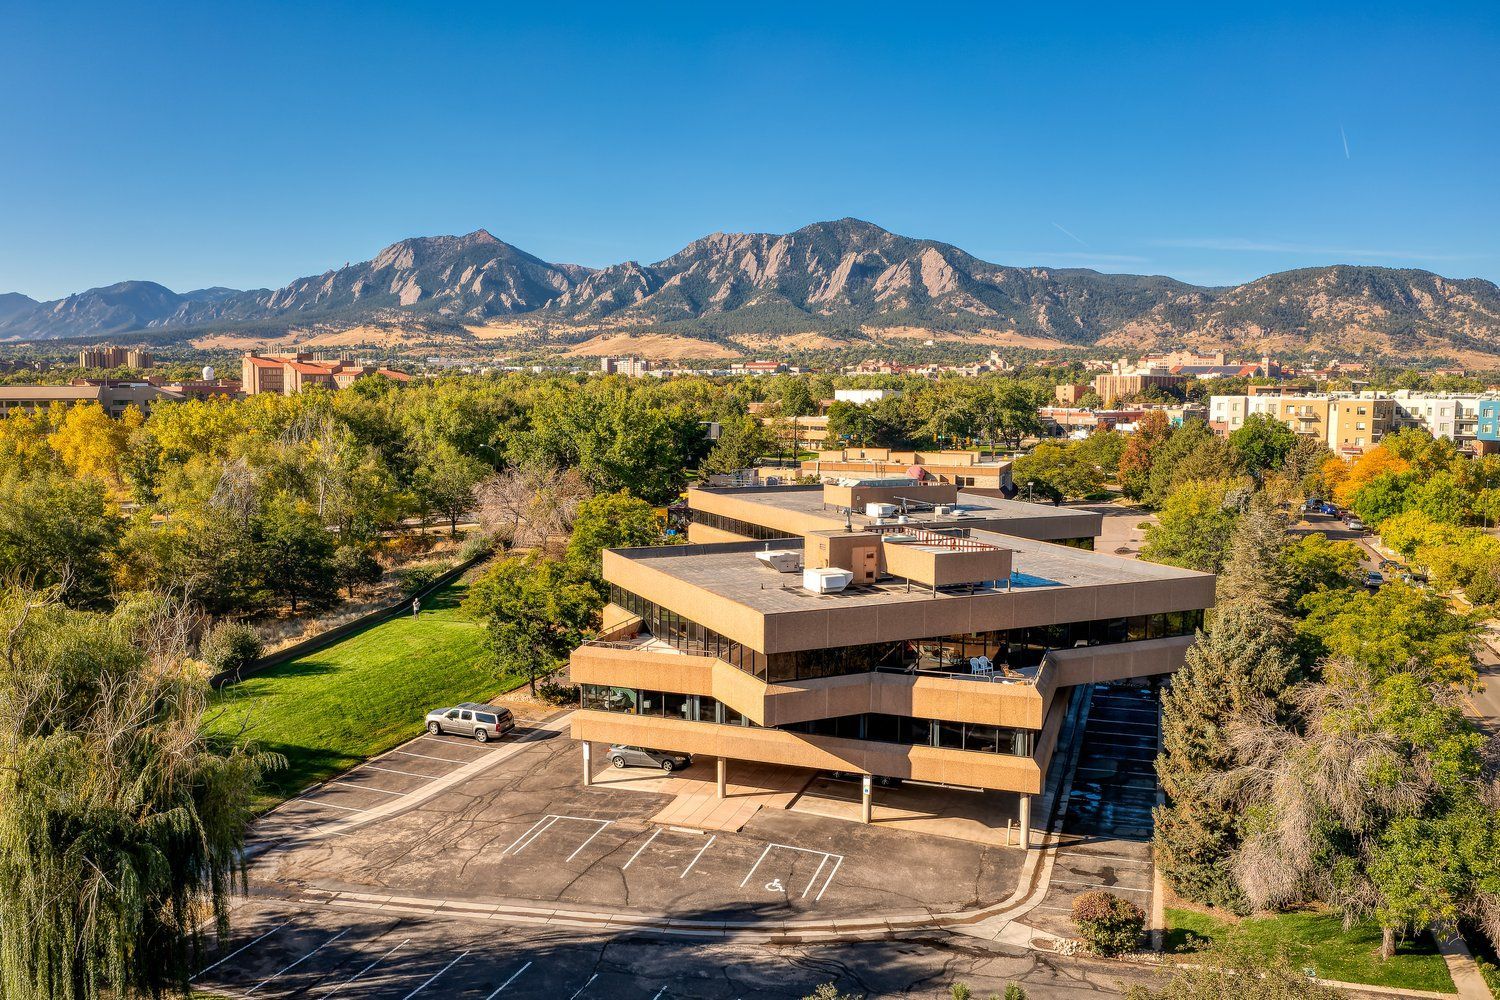 Gallery Photo of A view of the Boulder Healing hub from above